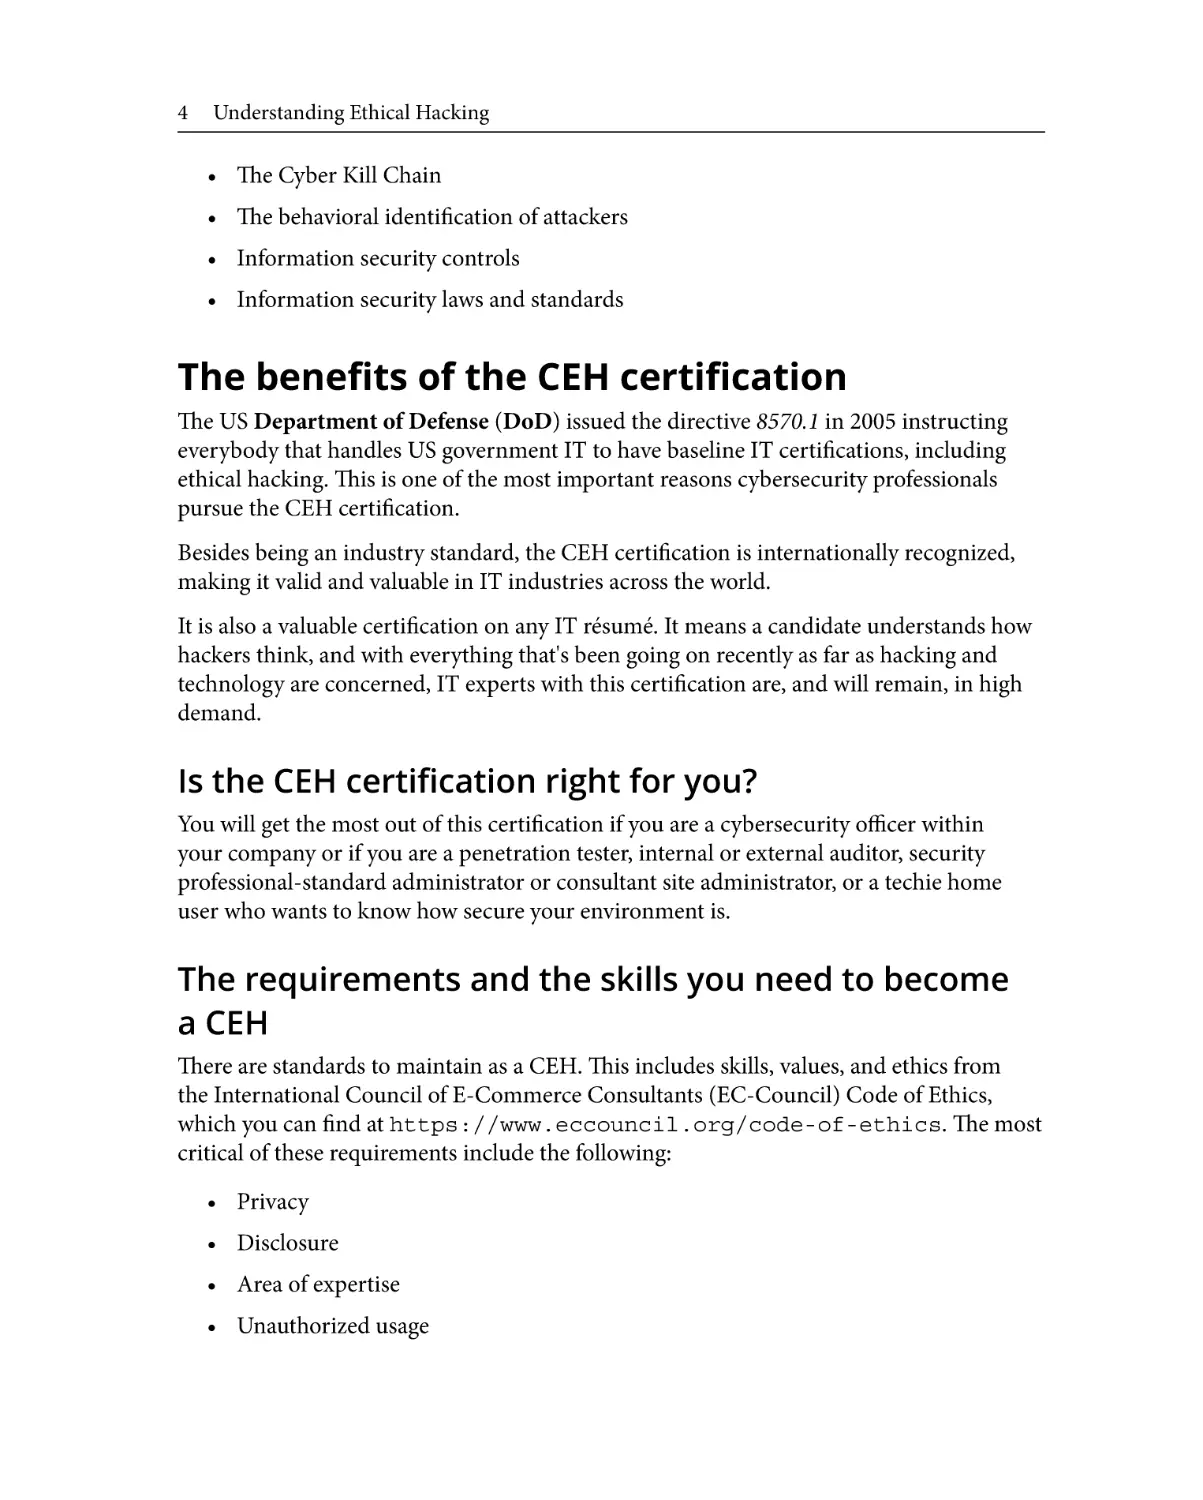 The benefits of the CEH certification
Is the CEH certification right for you?
The requirements and the skills you need to become